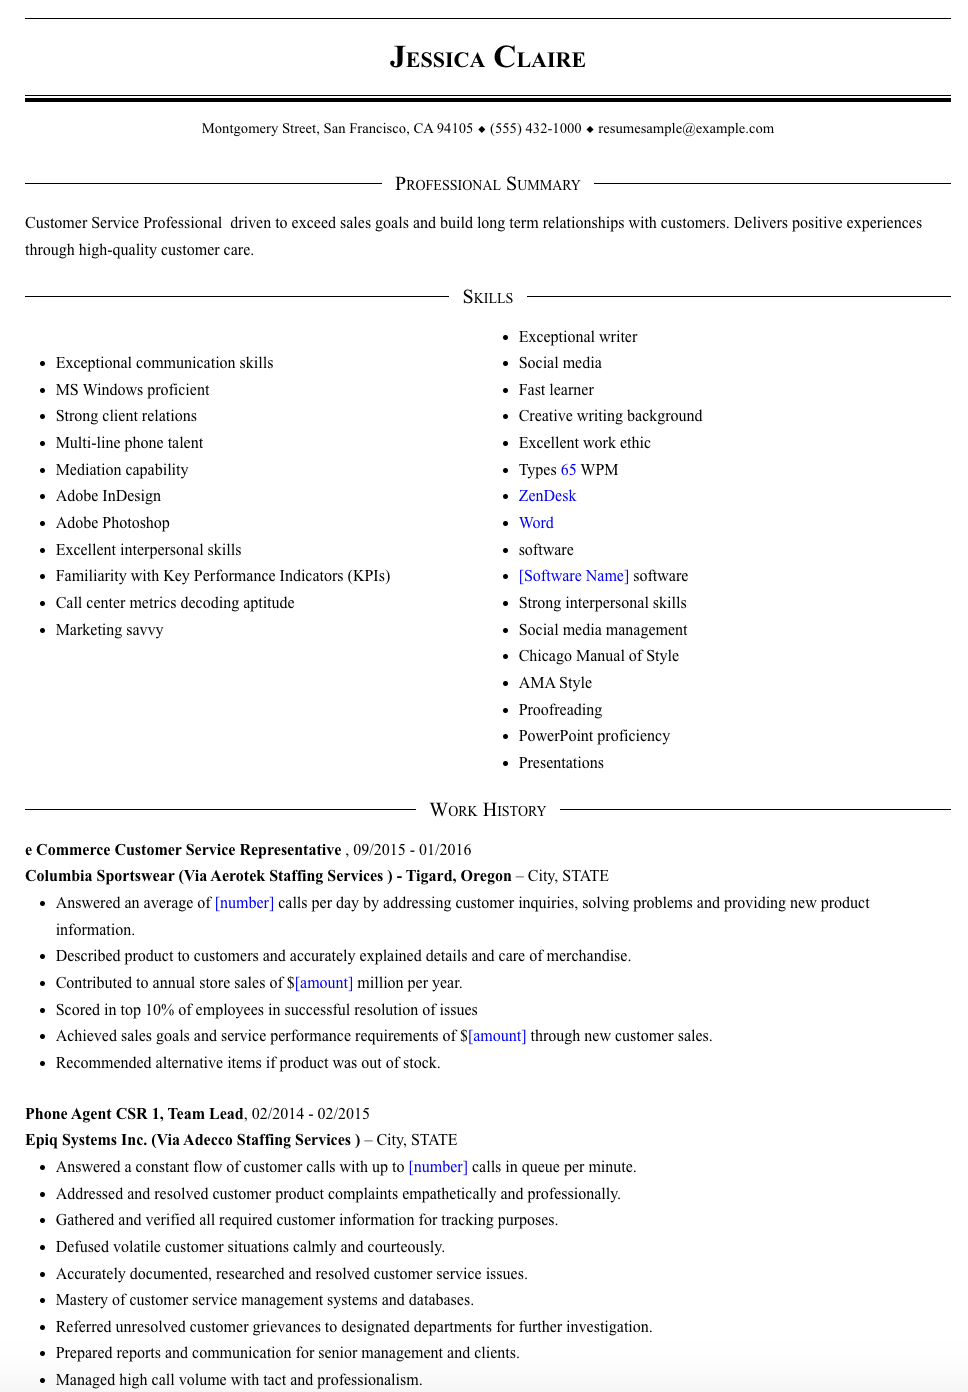 call center resume examples, ecommerce service rep